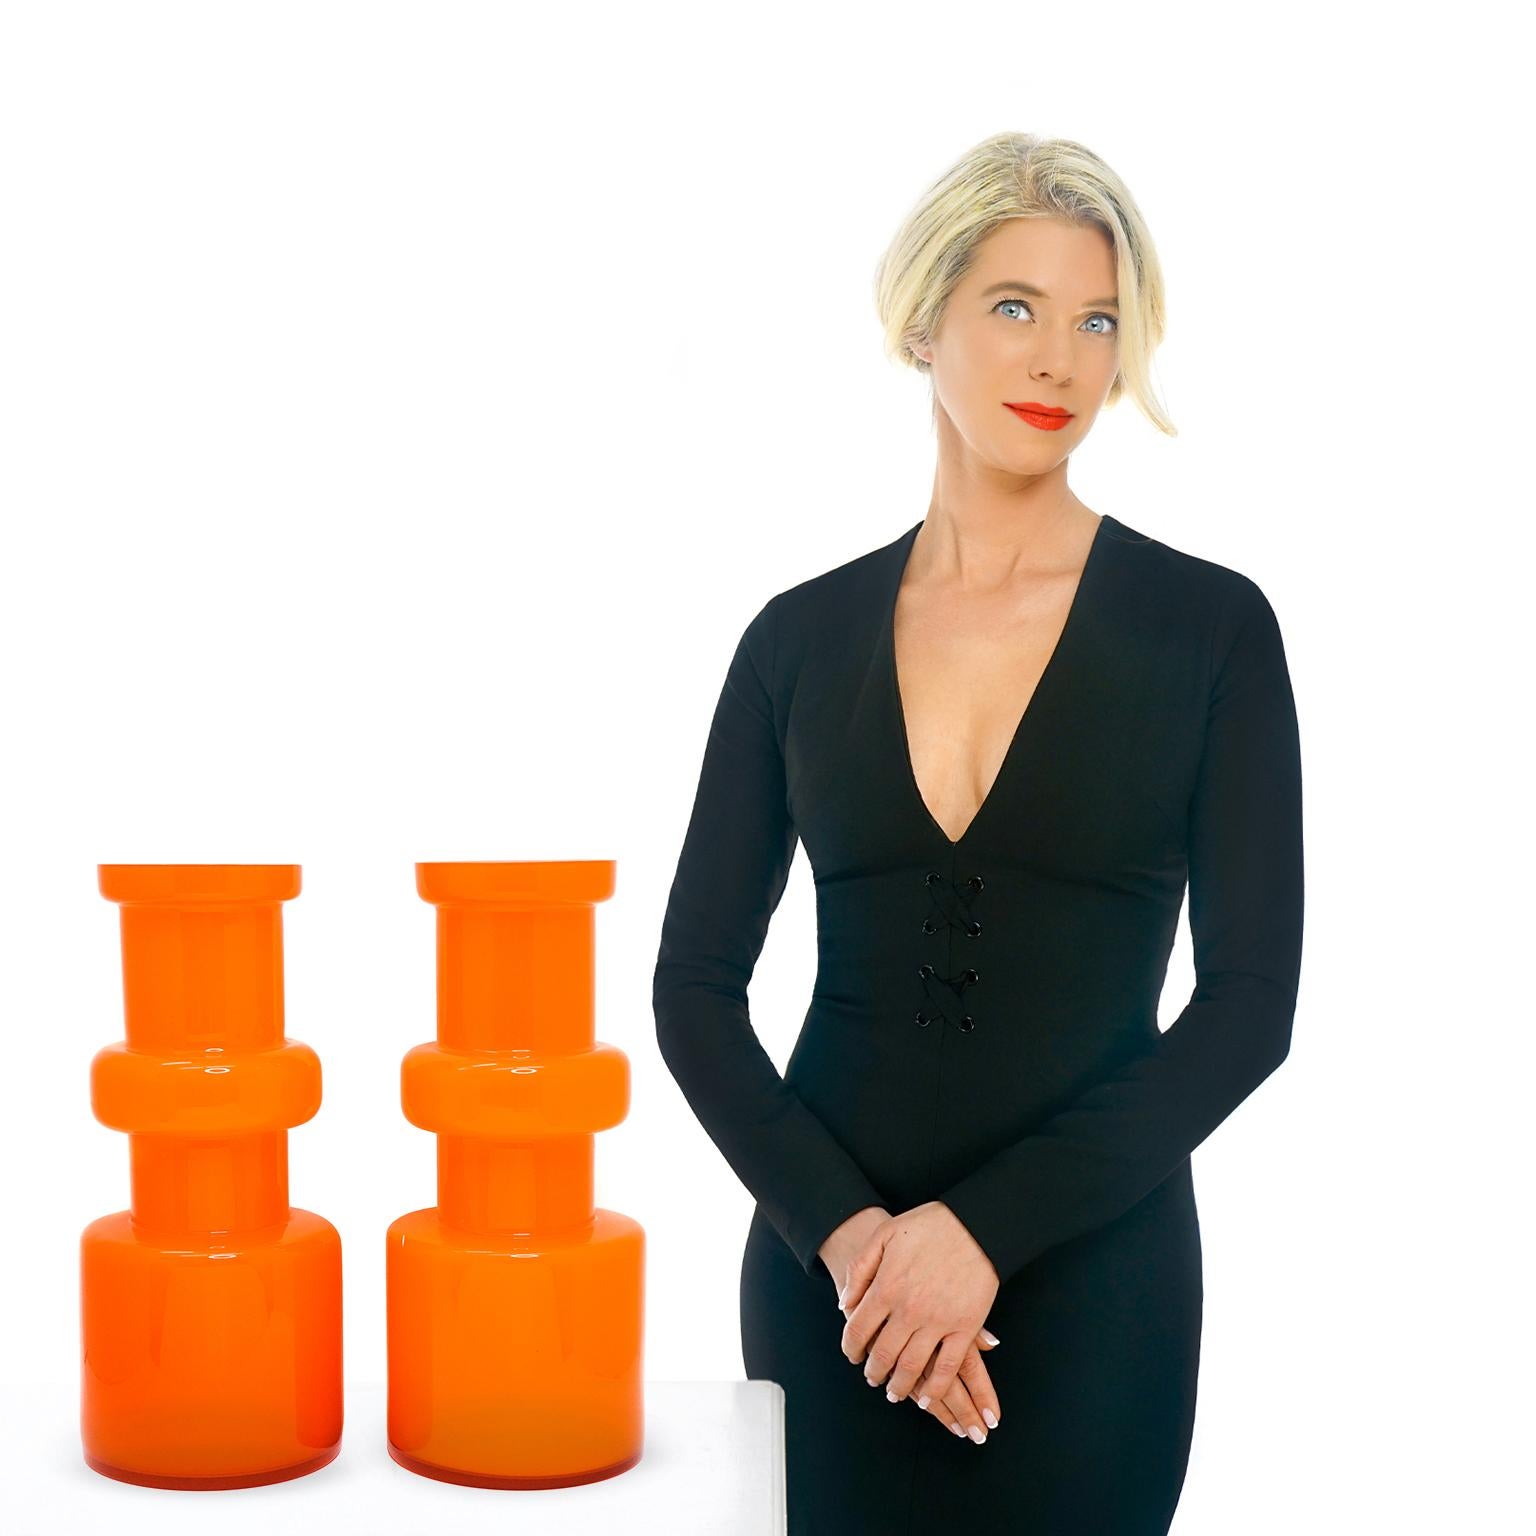 Circa 1950s, Italy.  This hyper modern pair of vases are the epitome of Italian design fifties style. The color is utterly fabulous and very unusual, a particularly bold orange. Beautifully made cased glass, they are white on the inside. Excellent